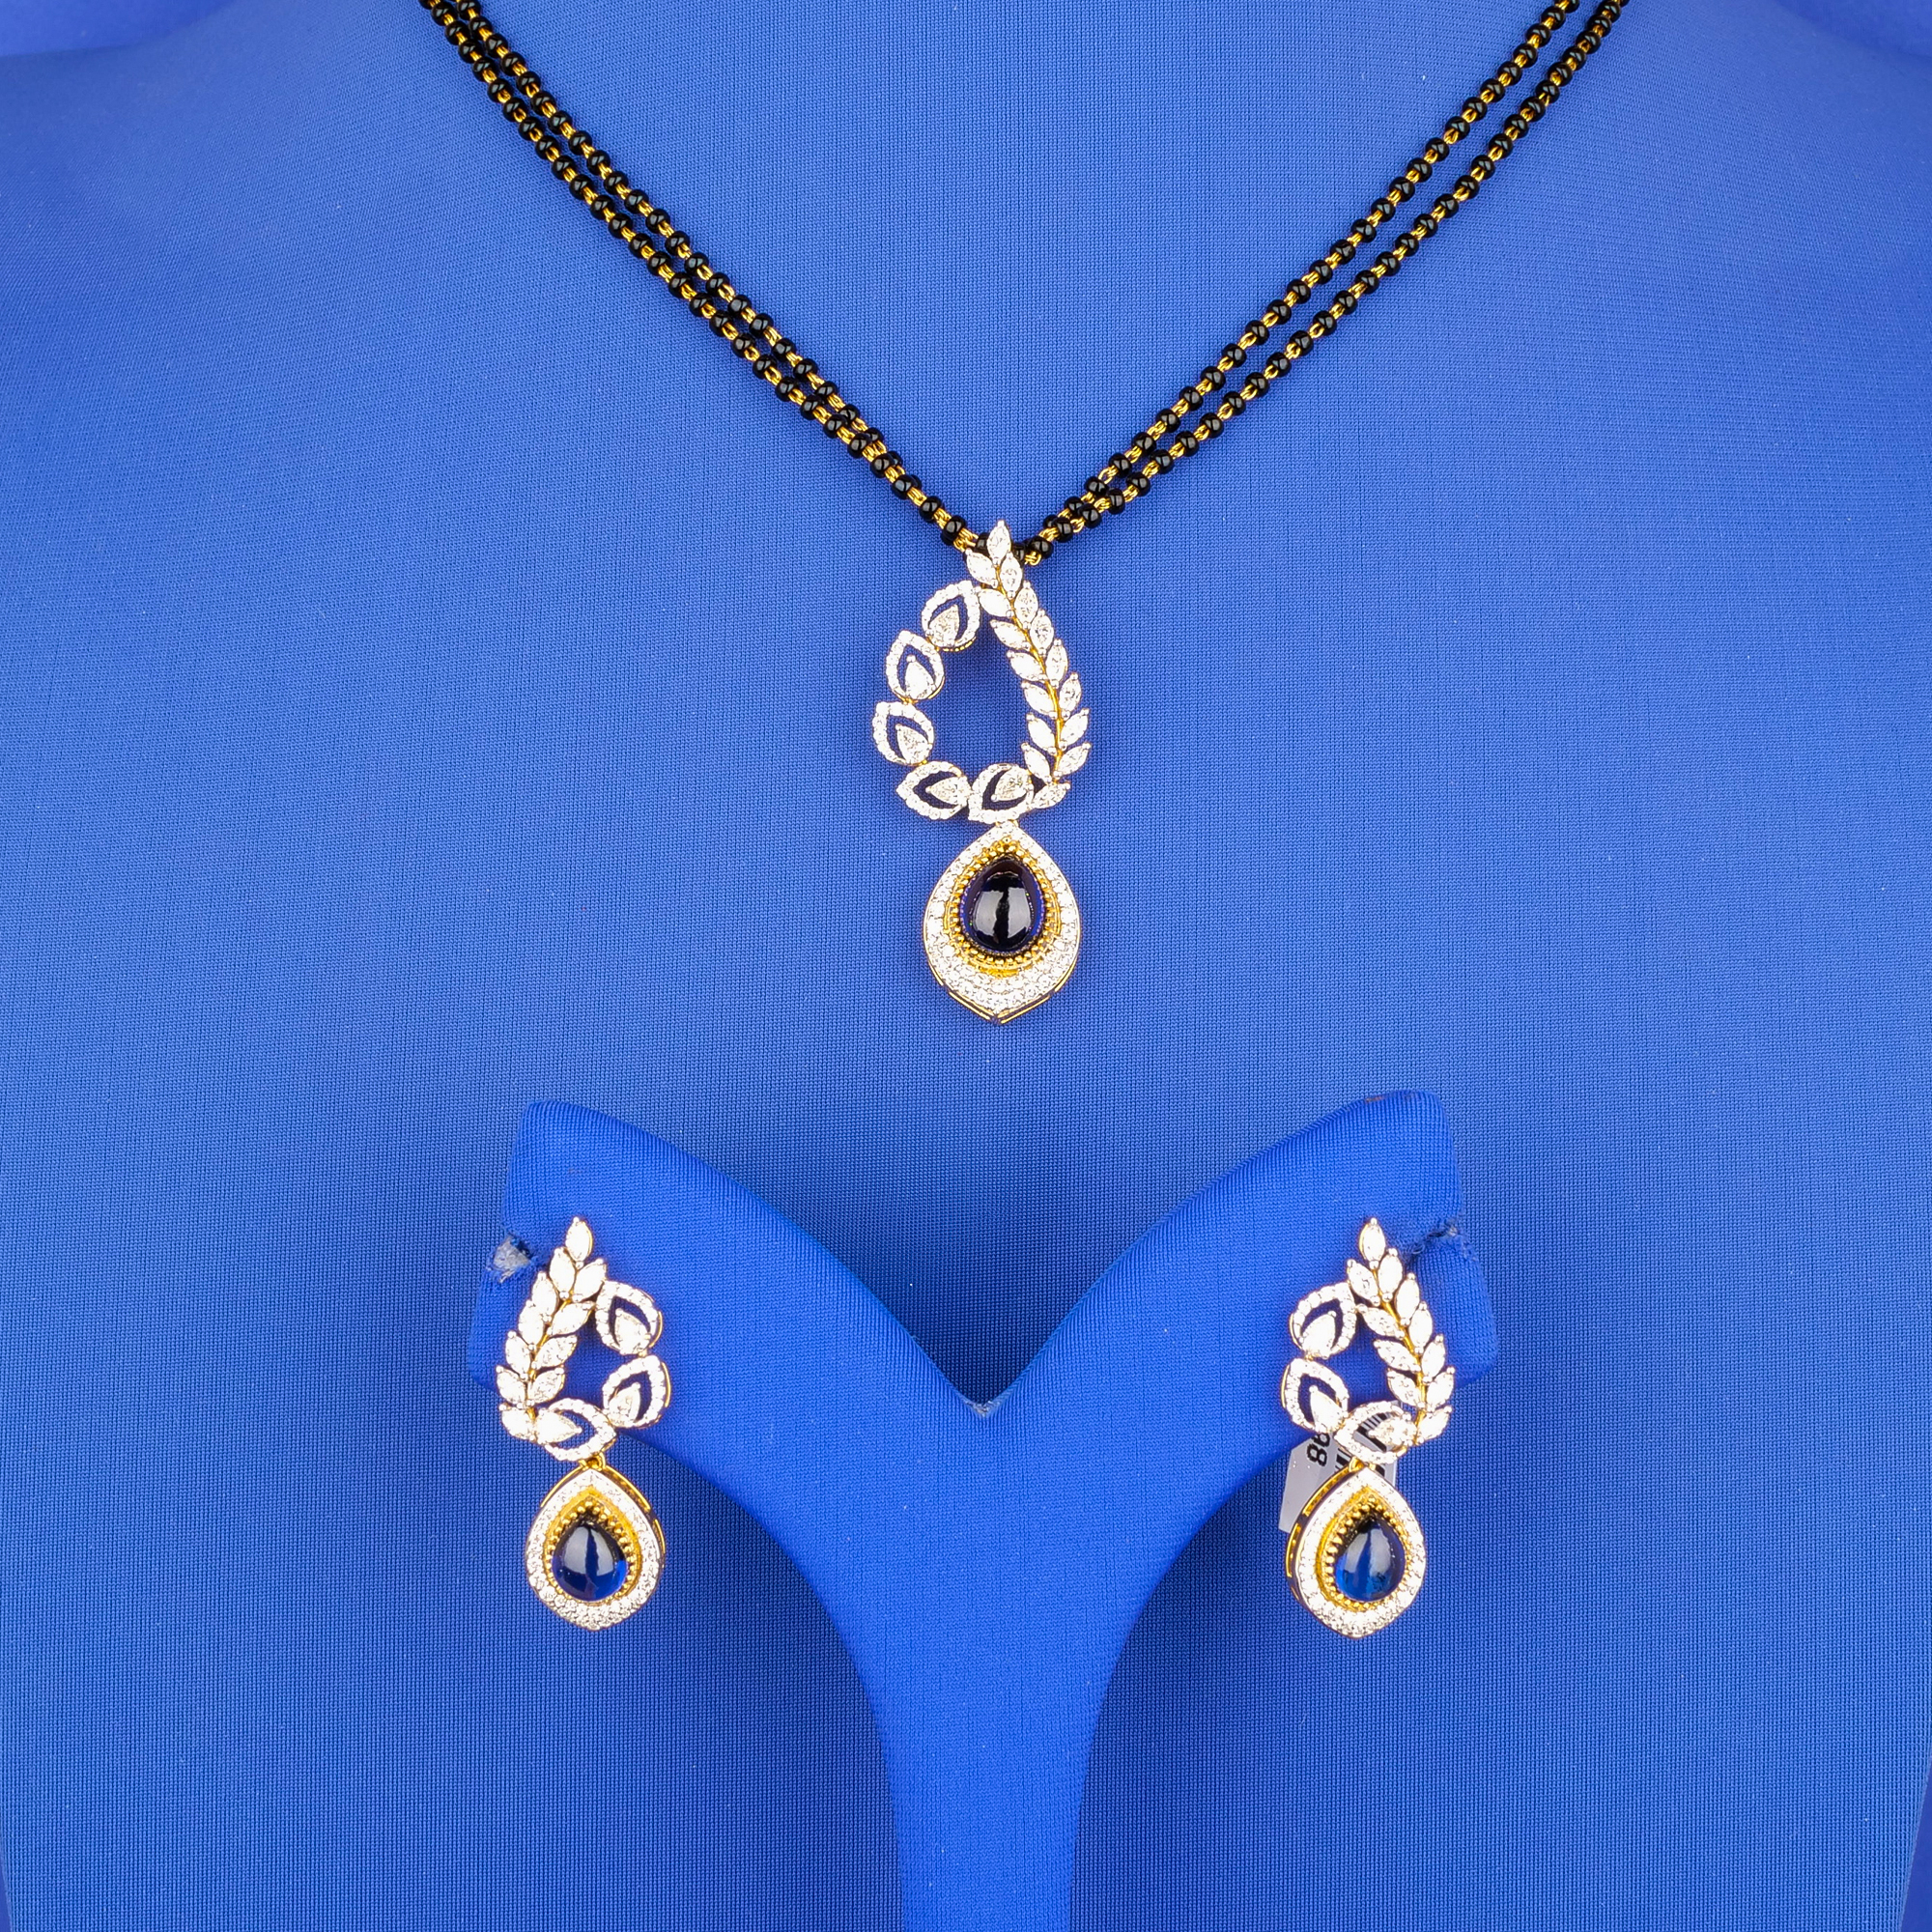 Opulent Ensemble: 18K Yellow Gold Diamond Mangalsutra Necklace and Earring Set with Stones